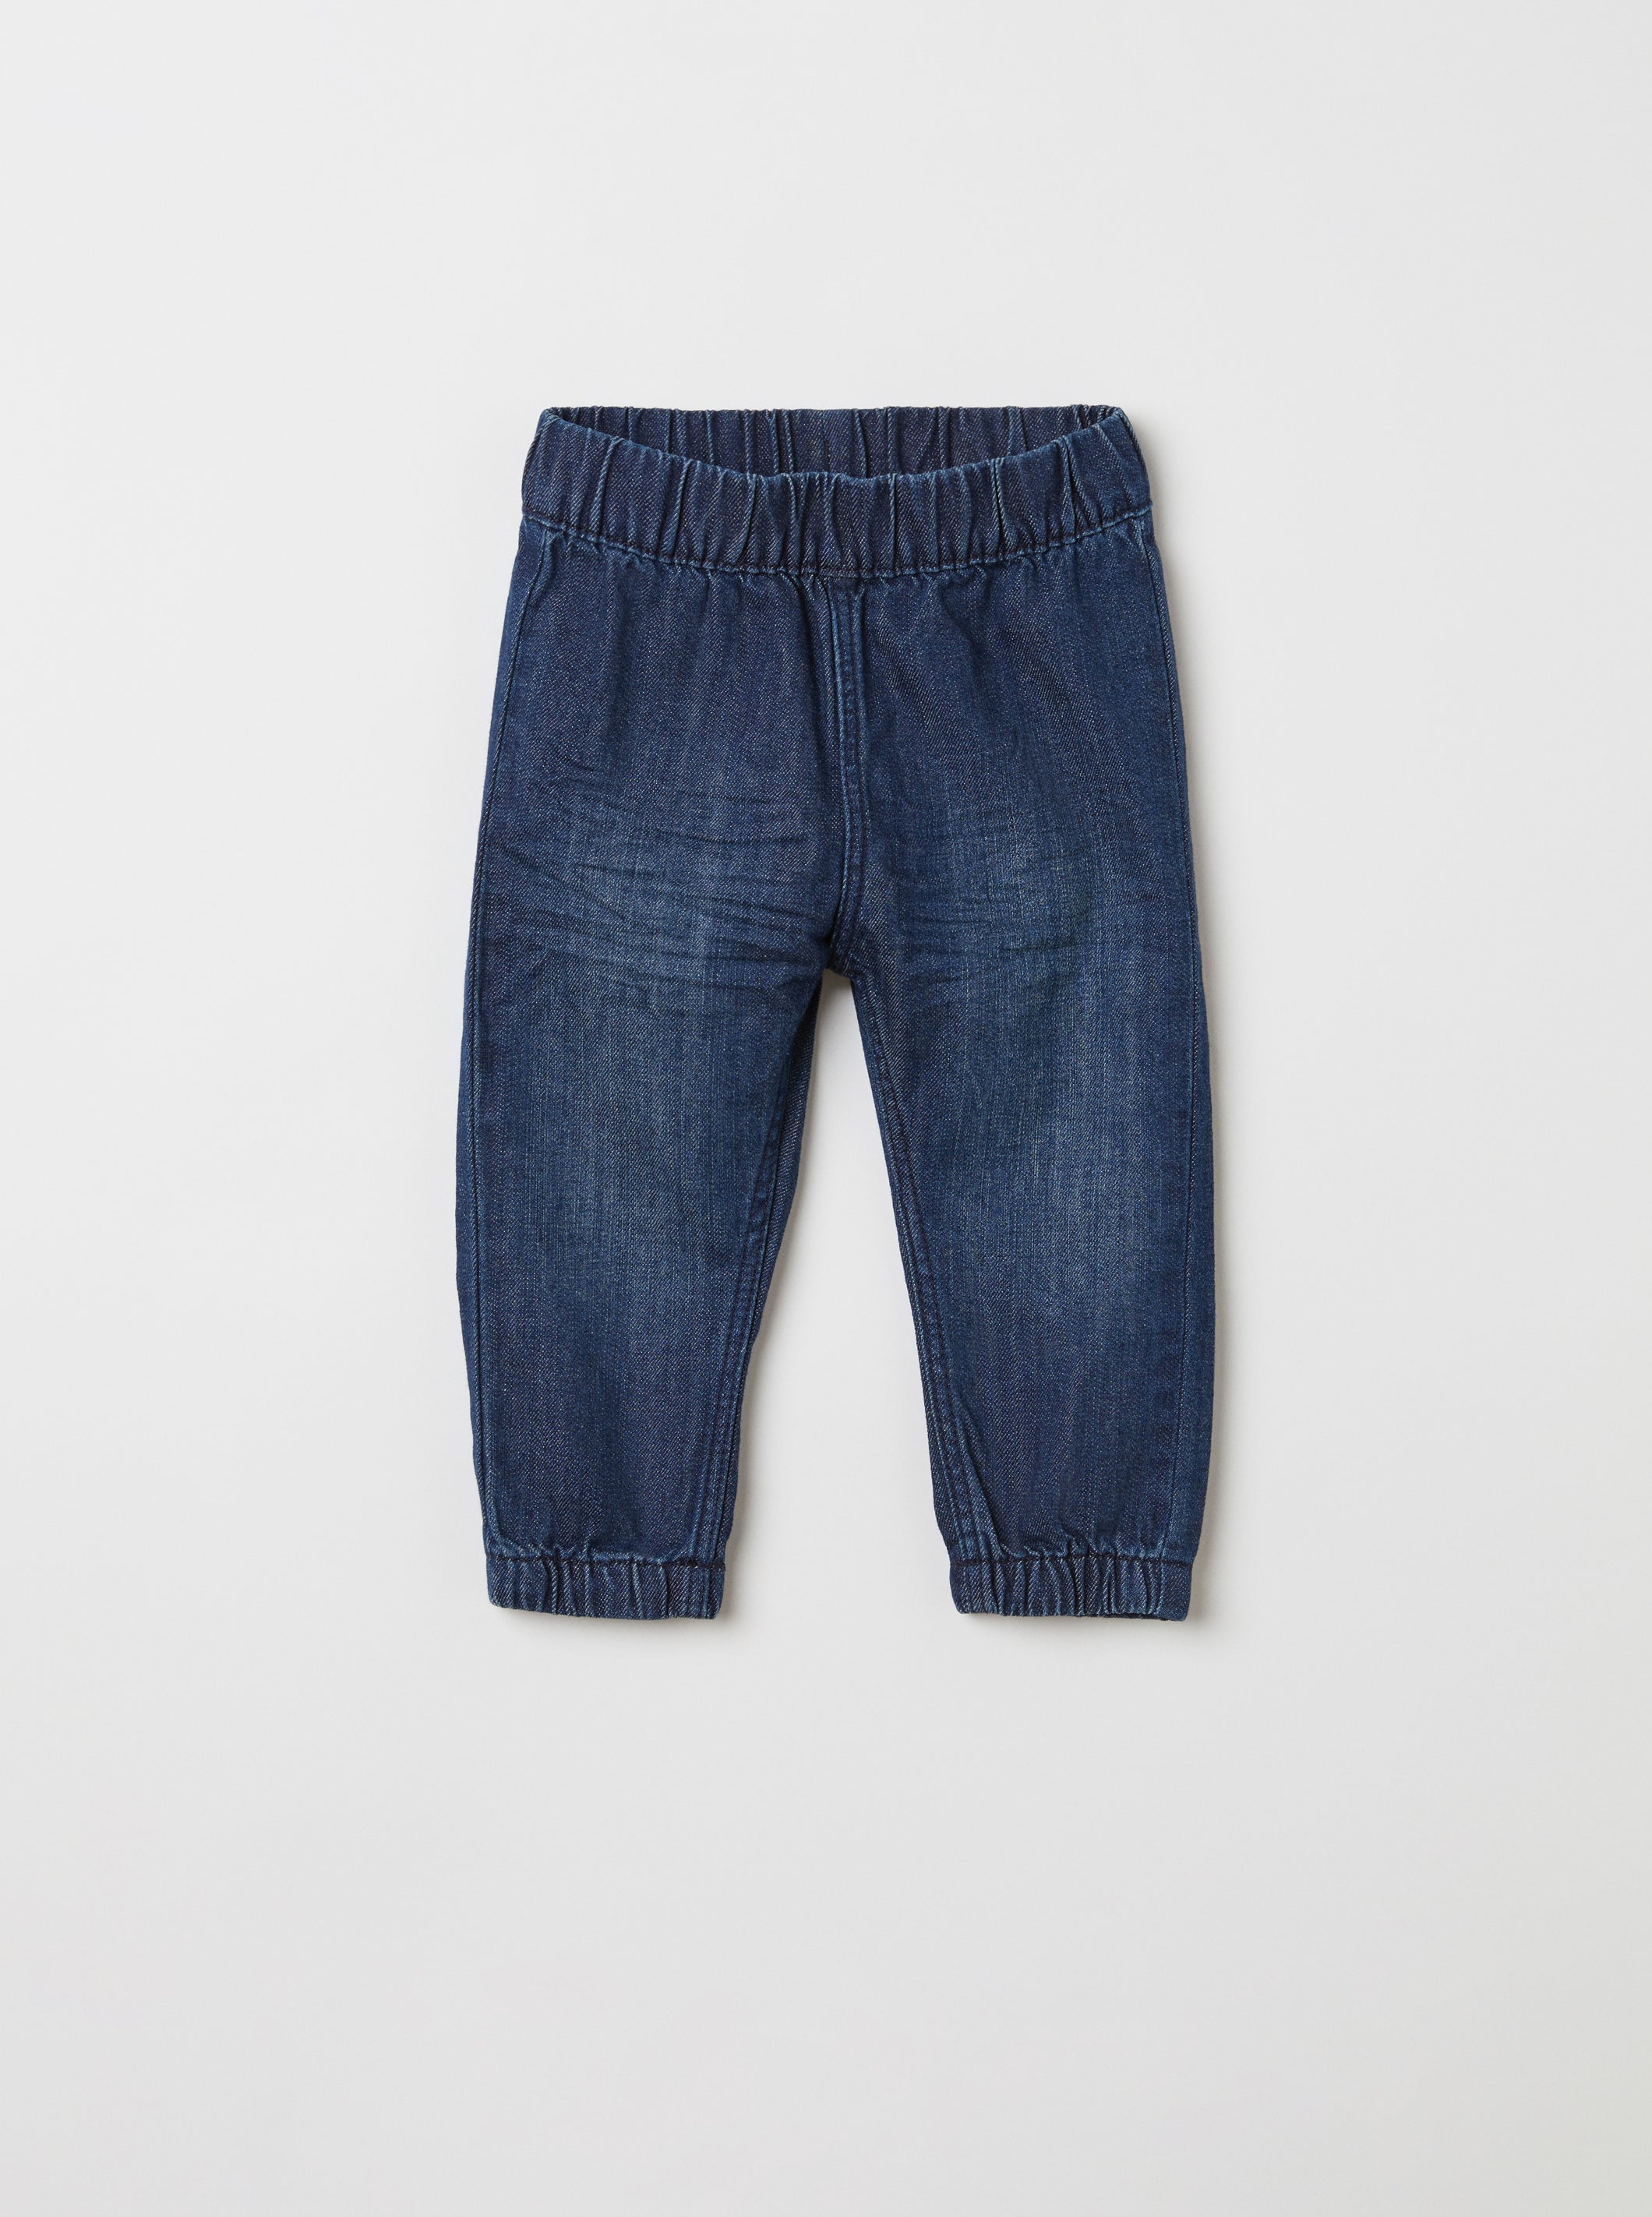 SAM - Pull-on Baby Jogger Jeans